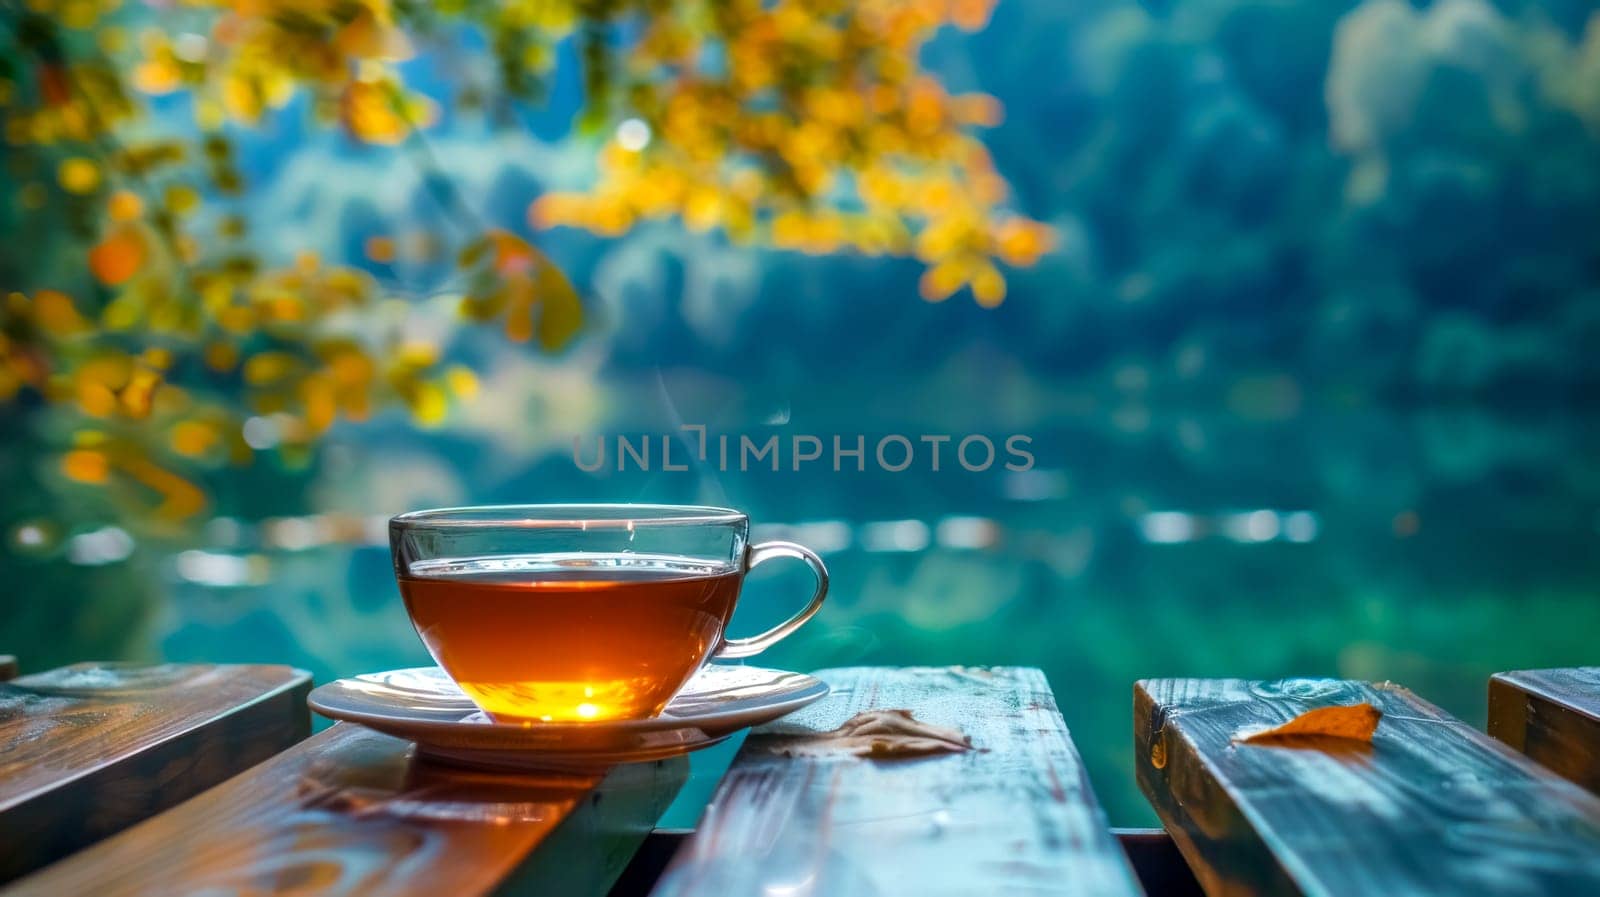 Serene morning tea by the lake by Edophoto